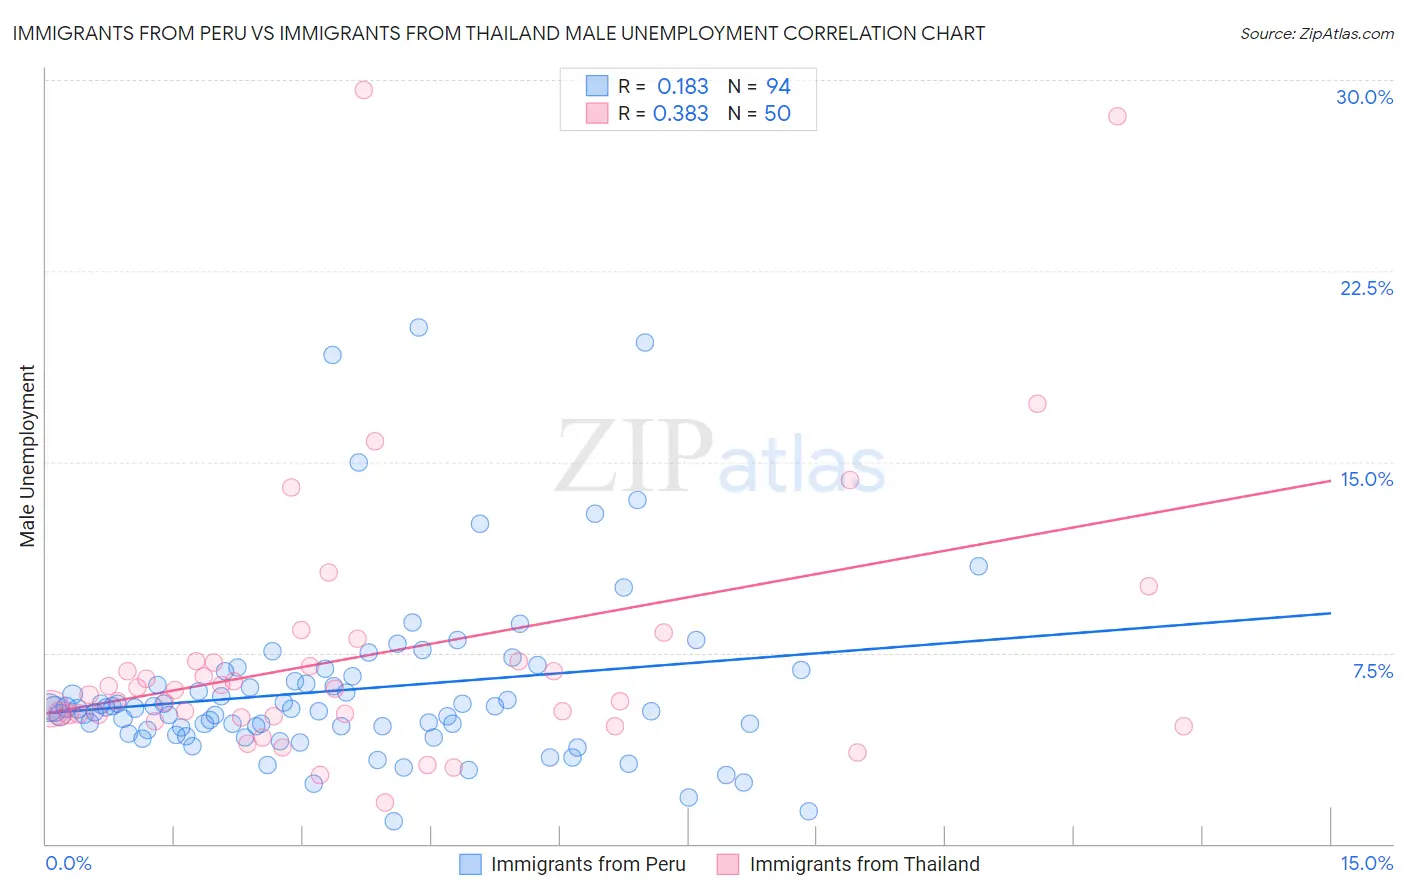 Immigrants from Peru vs Immigrants from Thailand Male Unemployment